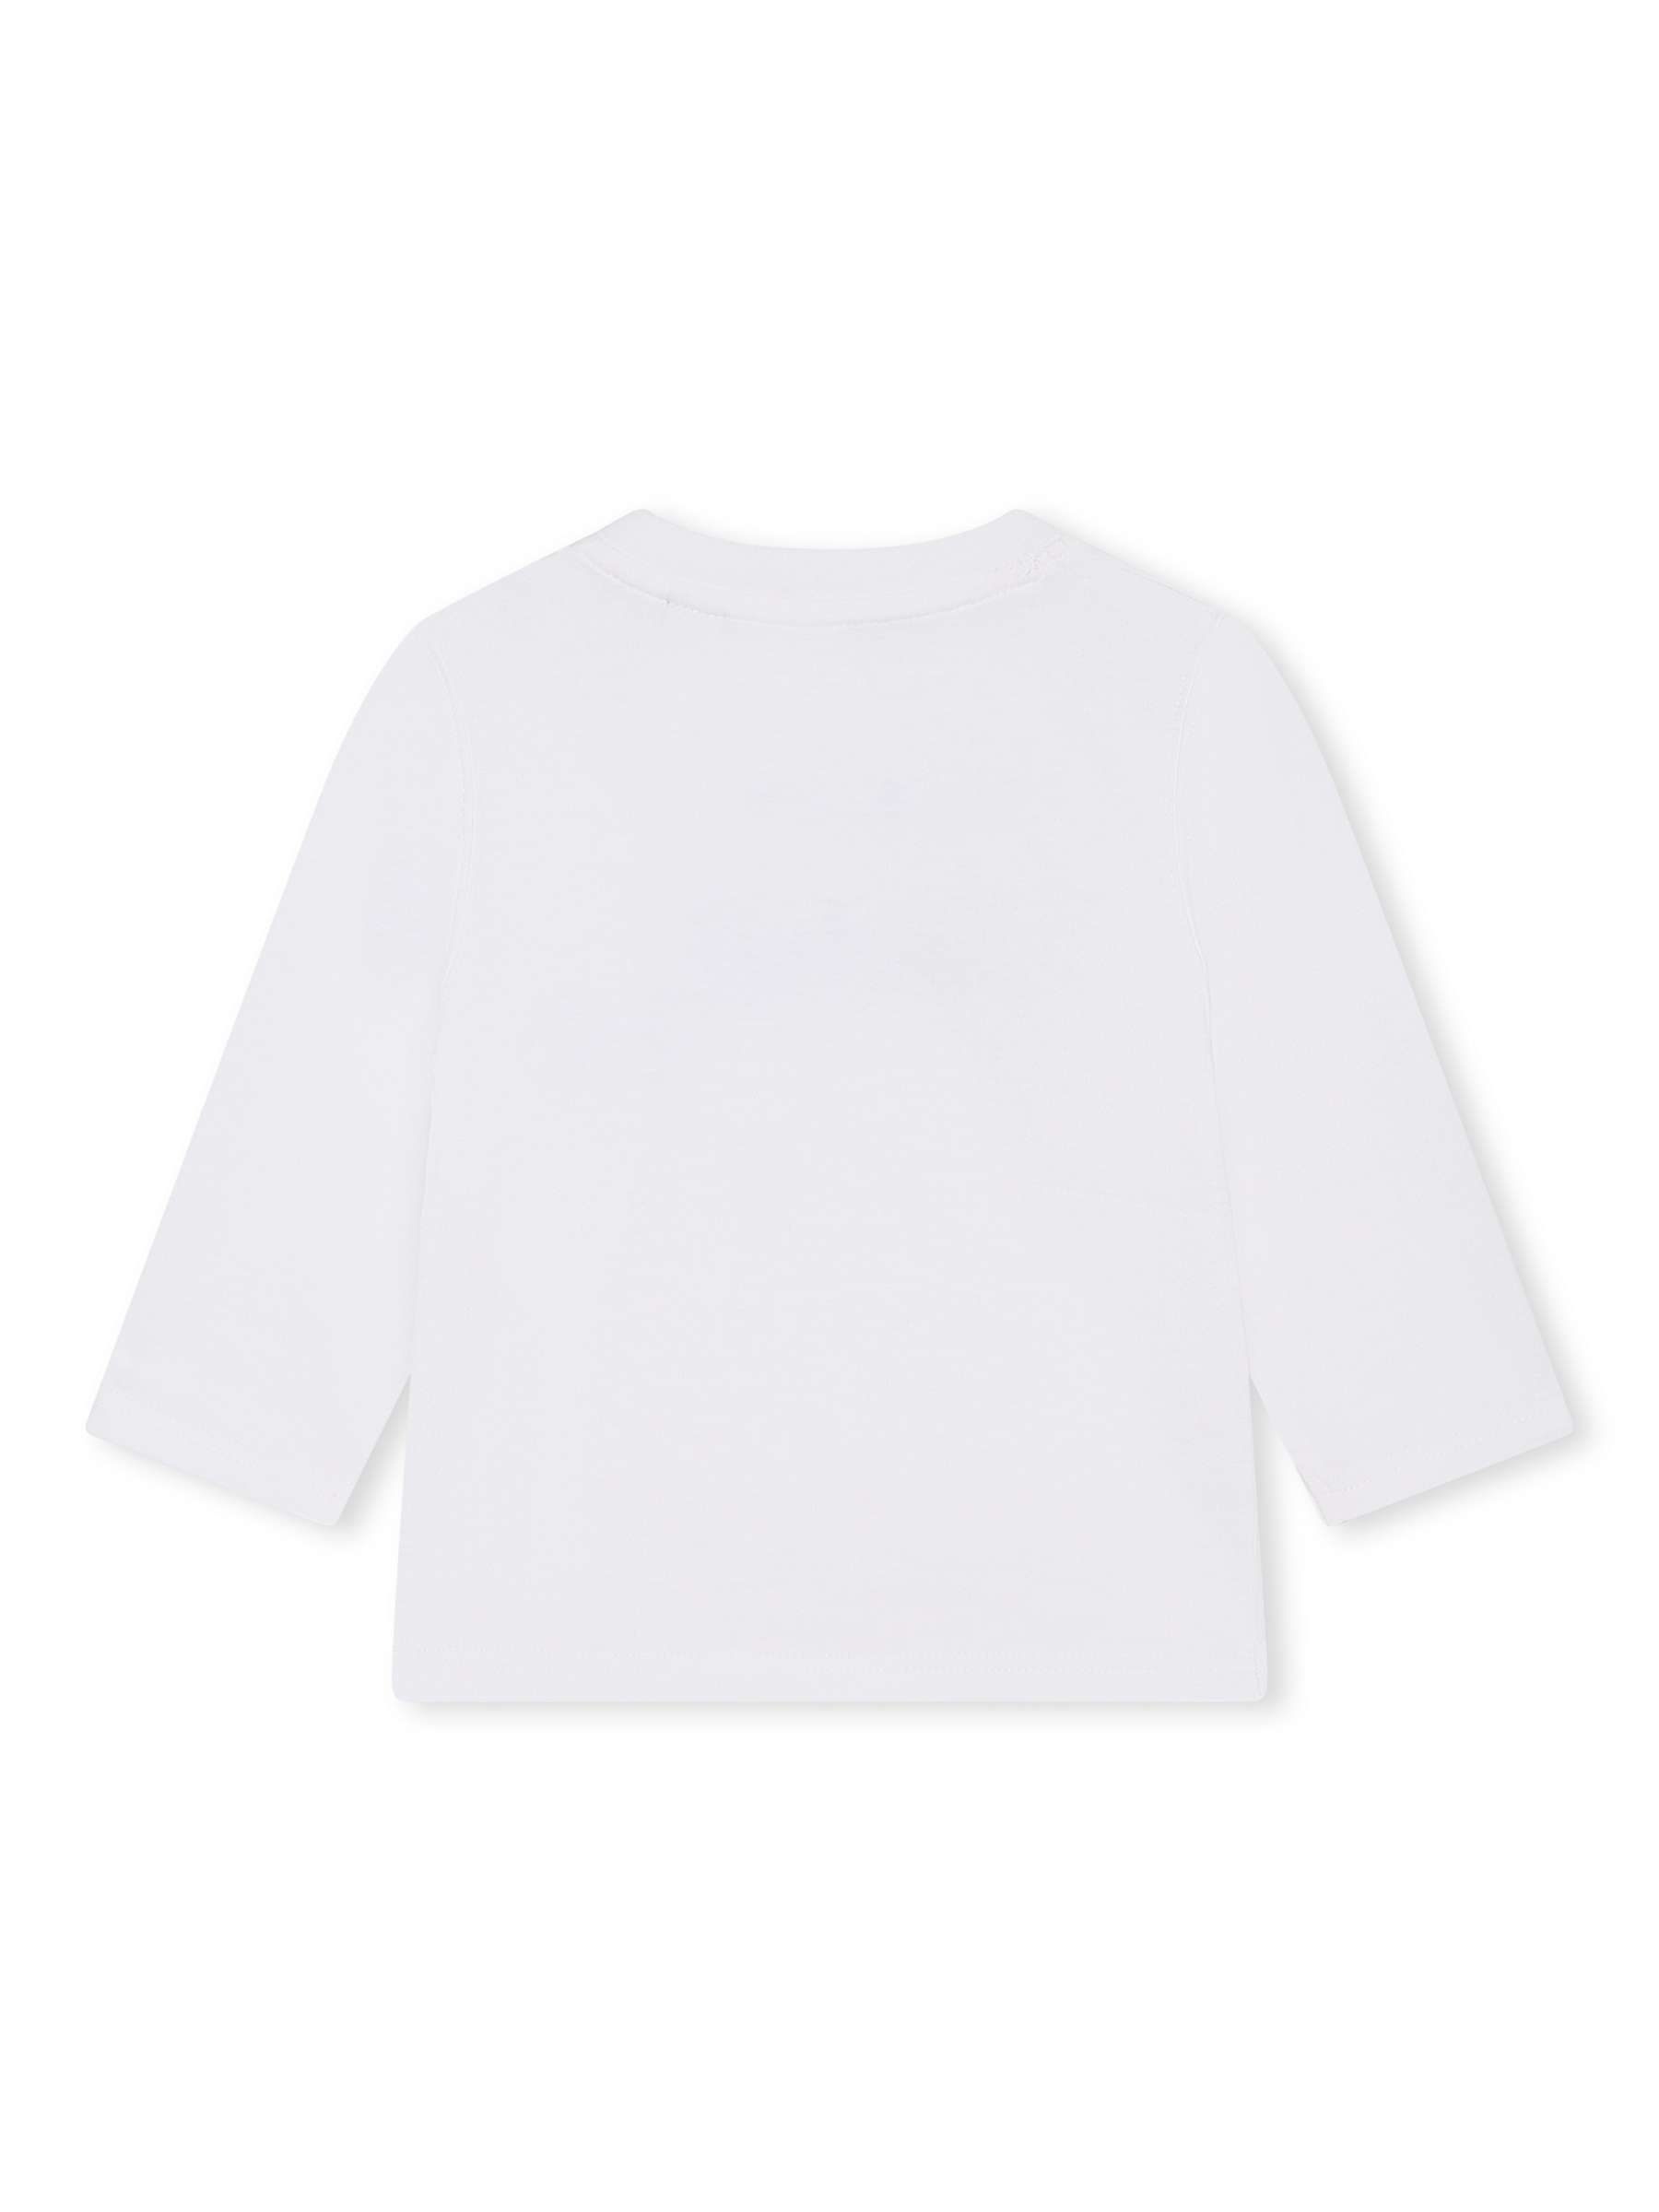 Buy Timberland Baby Logo Organic Cotton T-Shirts, Pack of 2, White/Red Online at johnlewis.com